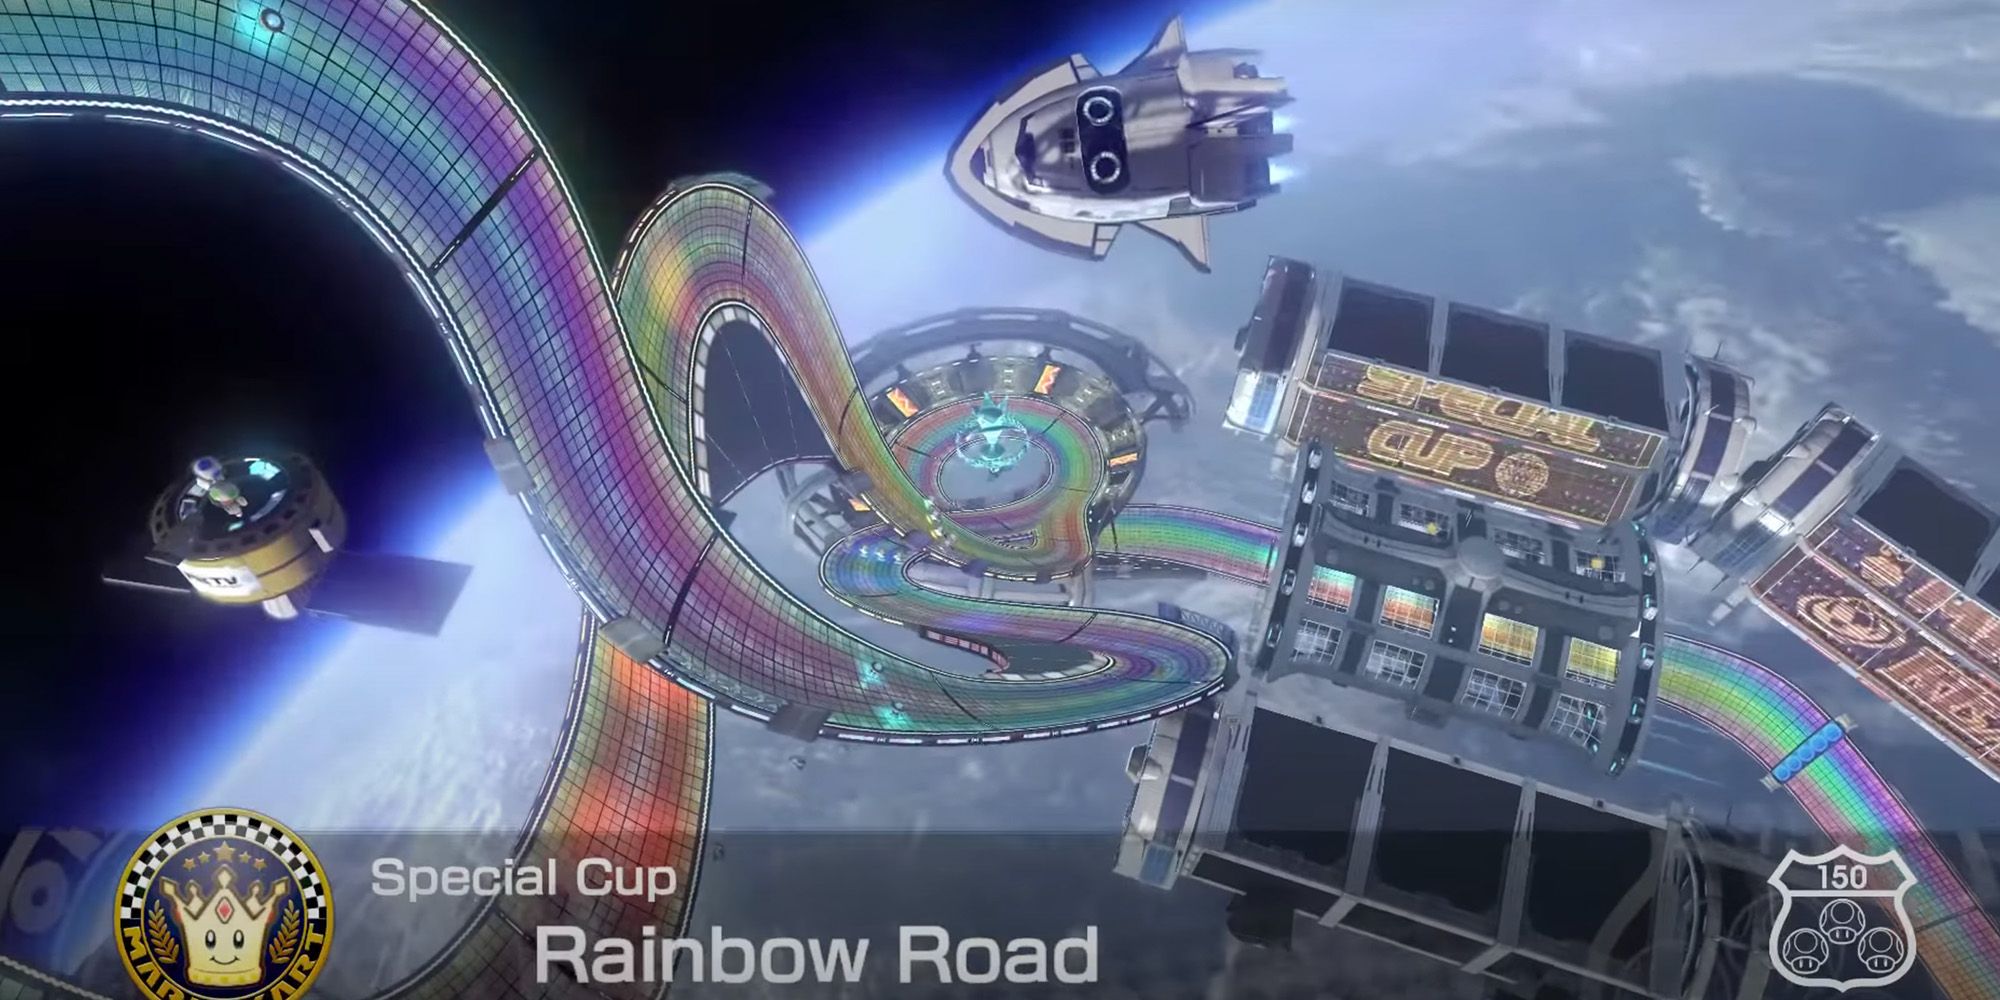 Mario Kart 8 Deluxe - A spaceship and satellite float above Rainbow Road